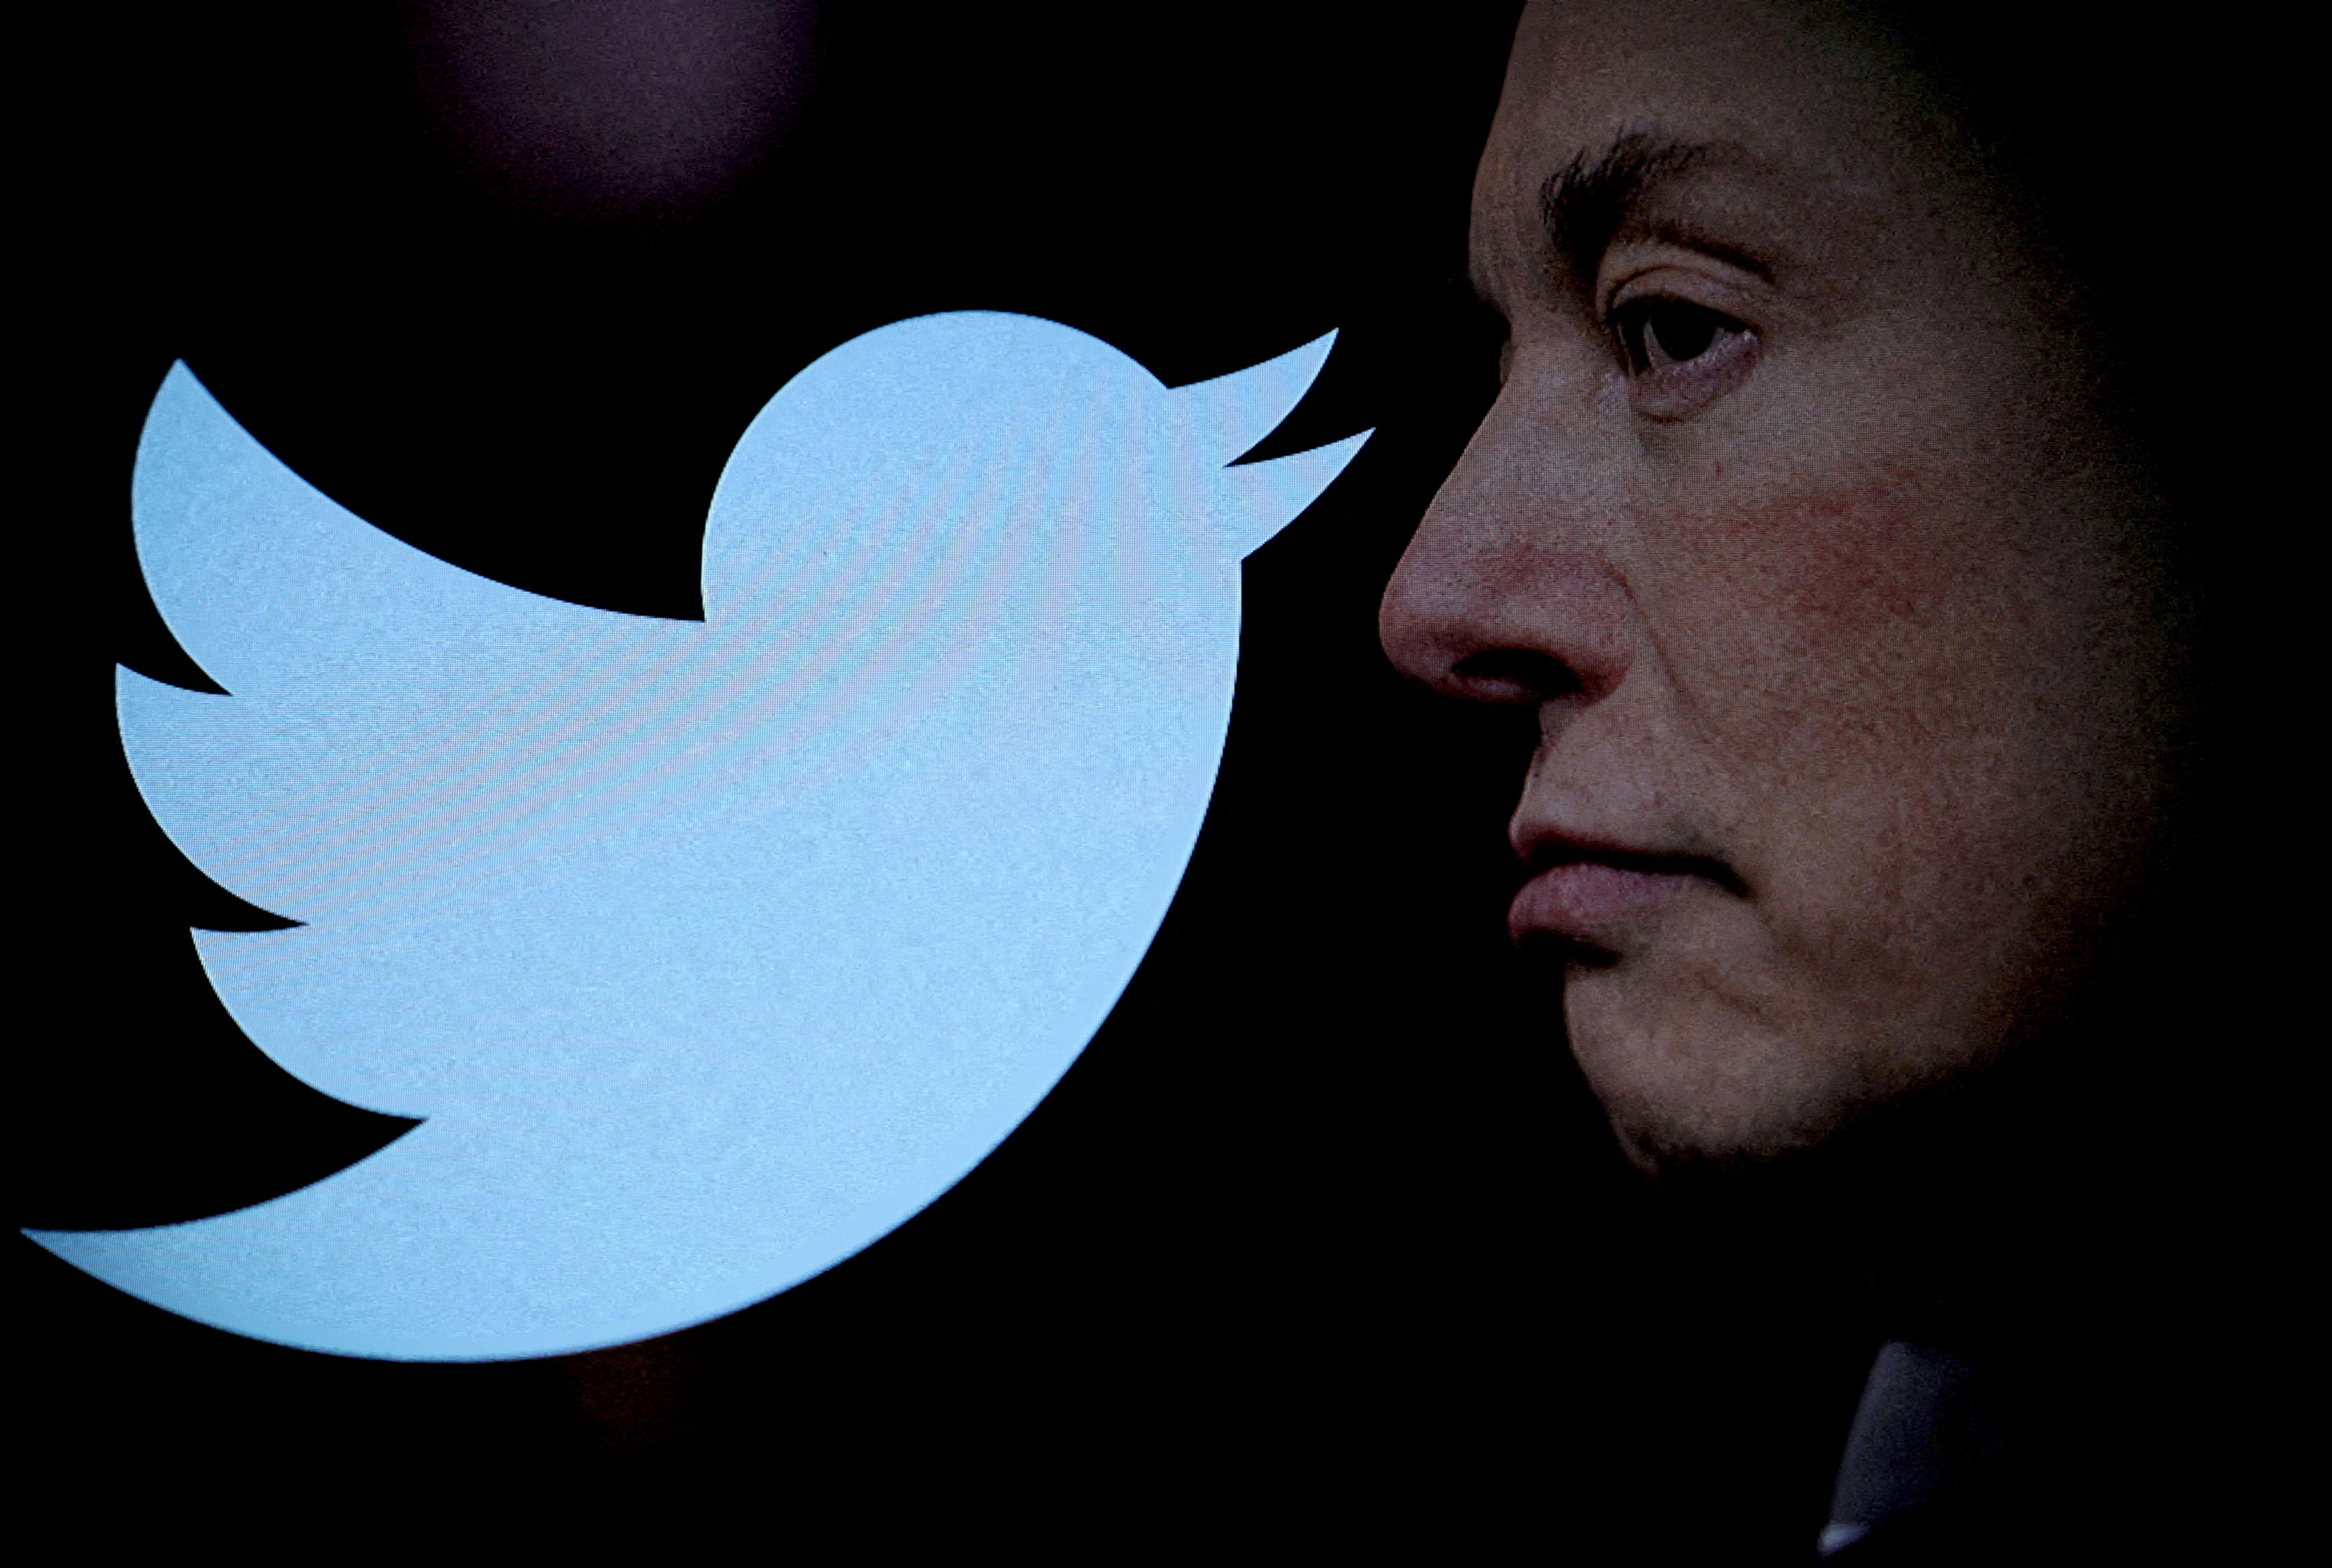 FILE PHOTO: The Twitter logo and image of Elon Musk are viewed through a magnifier in this illustration taken October 27, 2022. REUTERS/Dado Ruvic/Illustration/File Photo